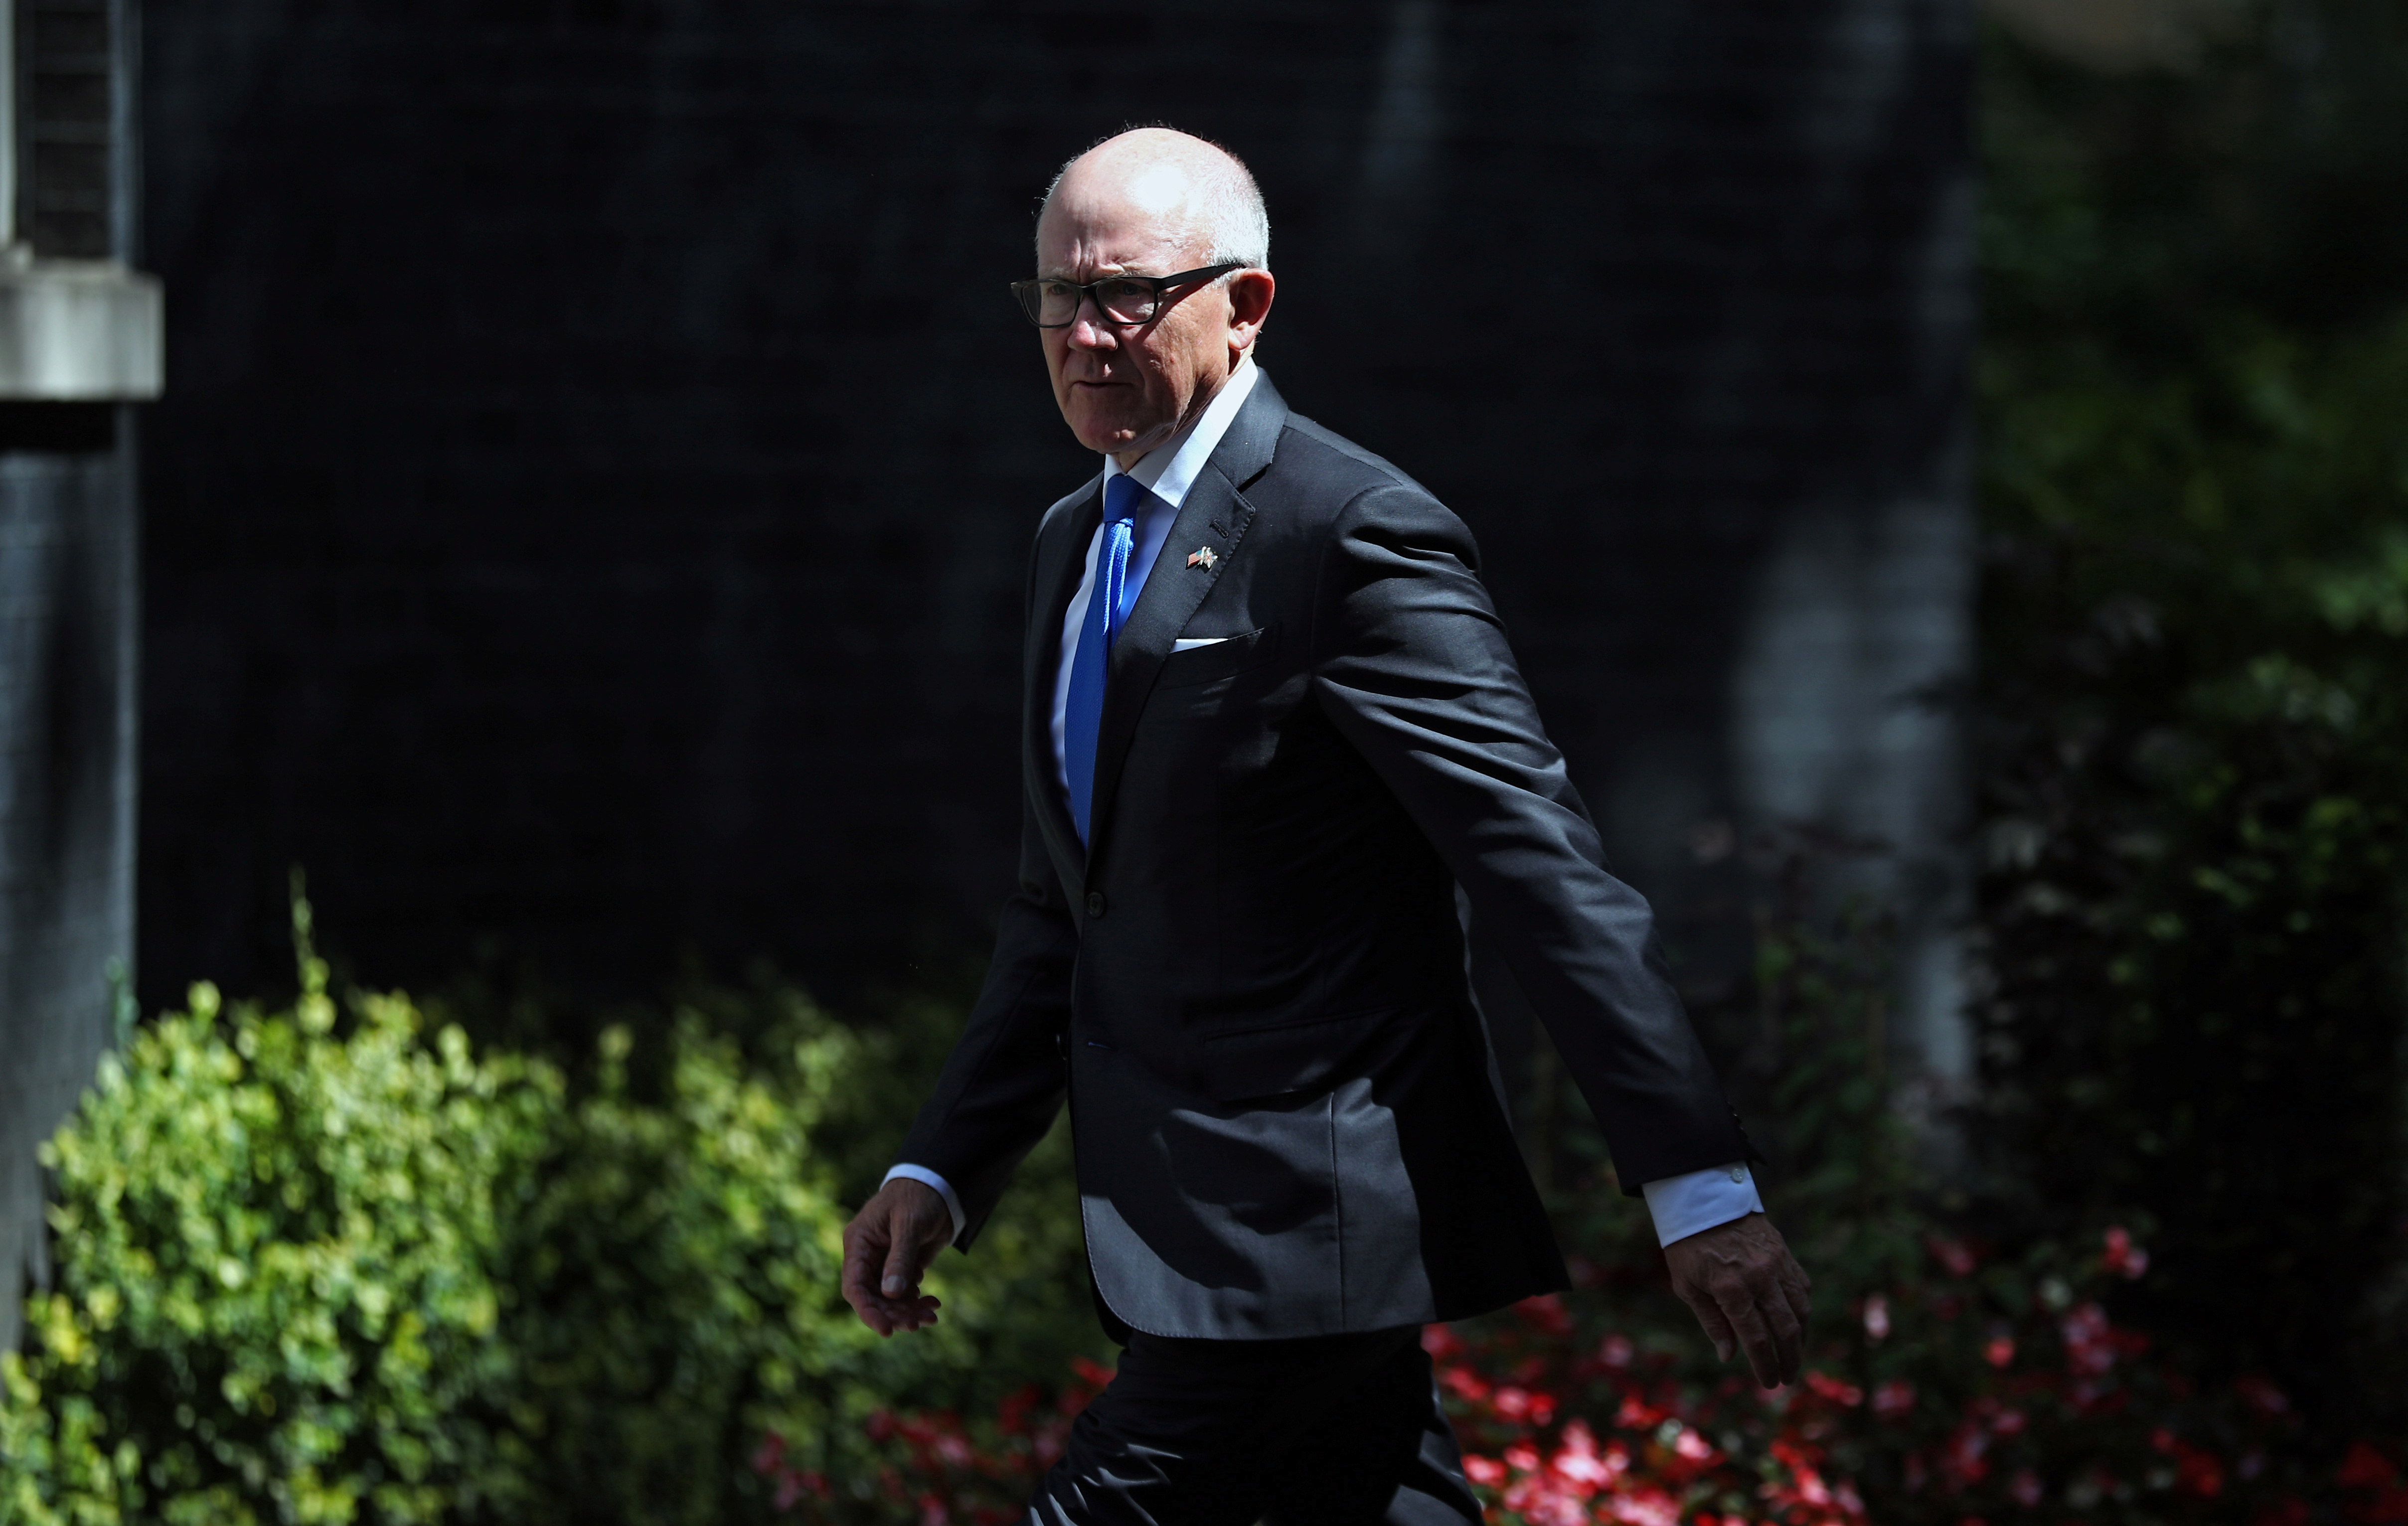 Robert Wood Johnson, the United States' ambassador to Britain, arrives for a meeting between U.S. Secretary of State Mike Pompeo and Britain's Prime Minister Boris Johnson at Downing Street for talks on July 21, 2020 in London, England. (Photo: Hannah McKay/WPA Pool/Getty Images)